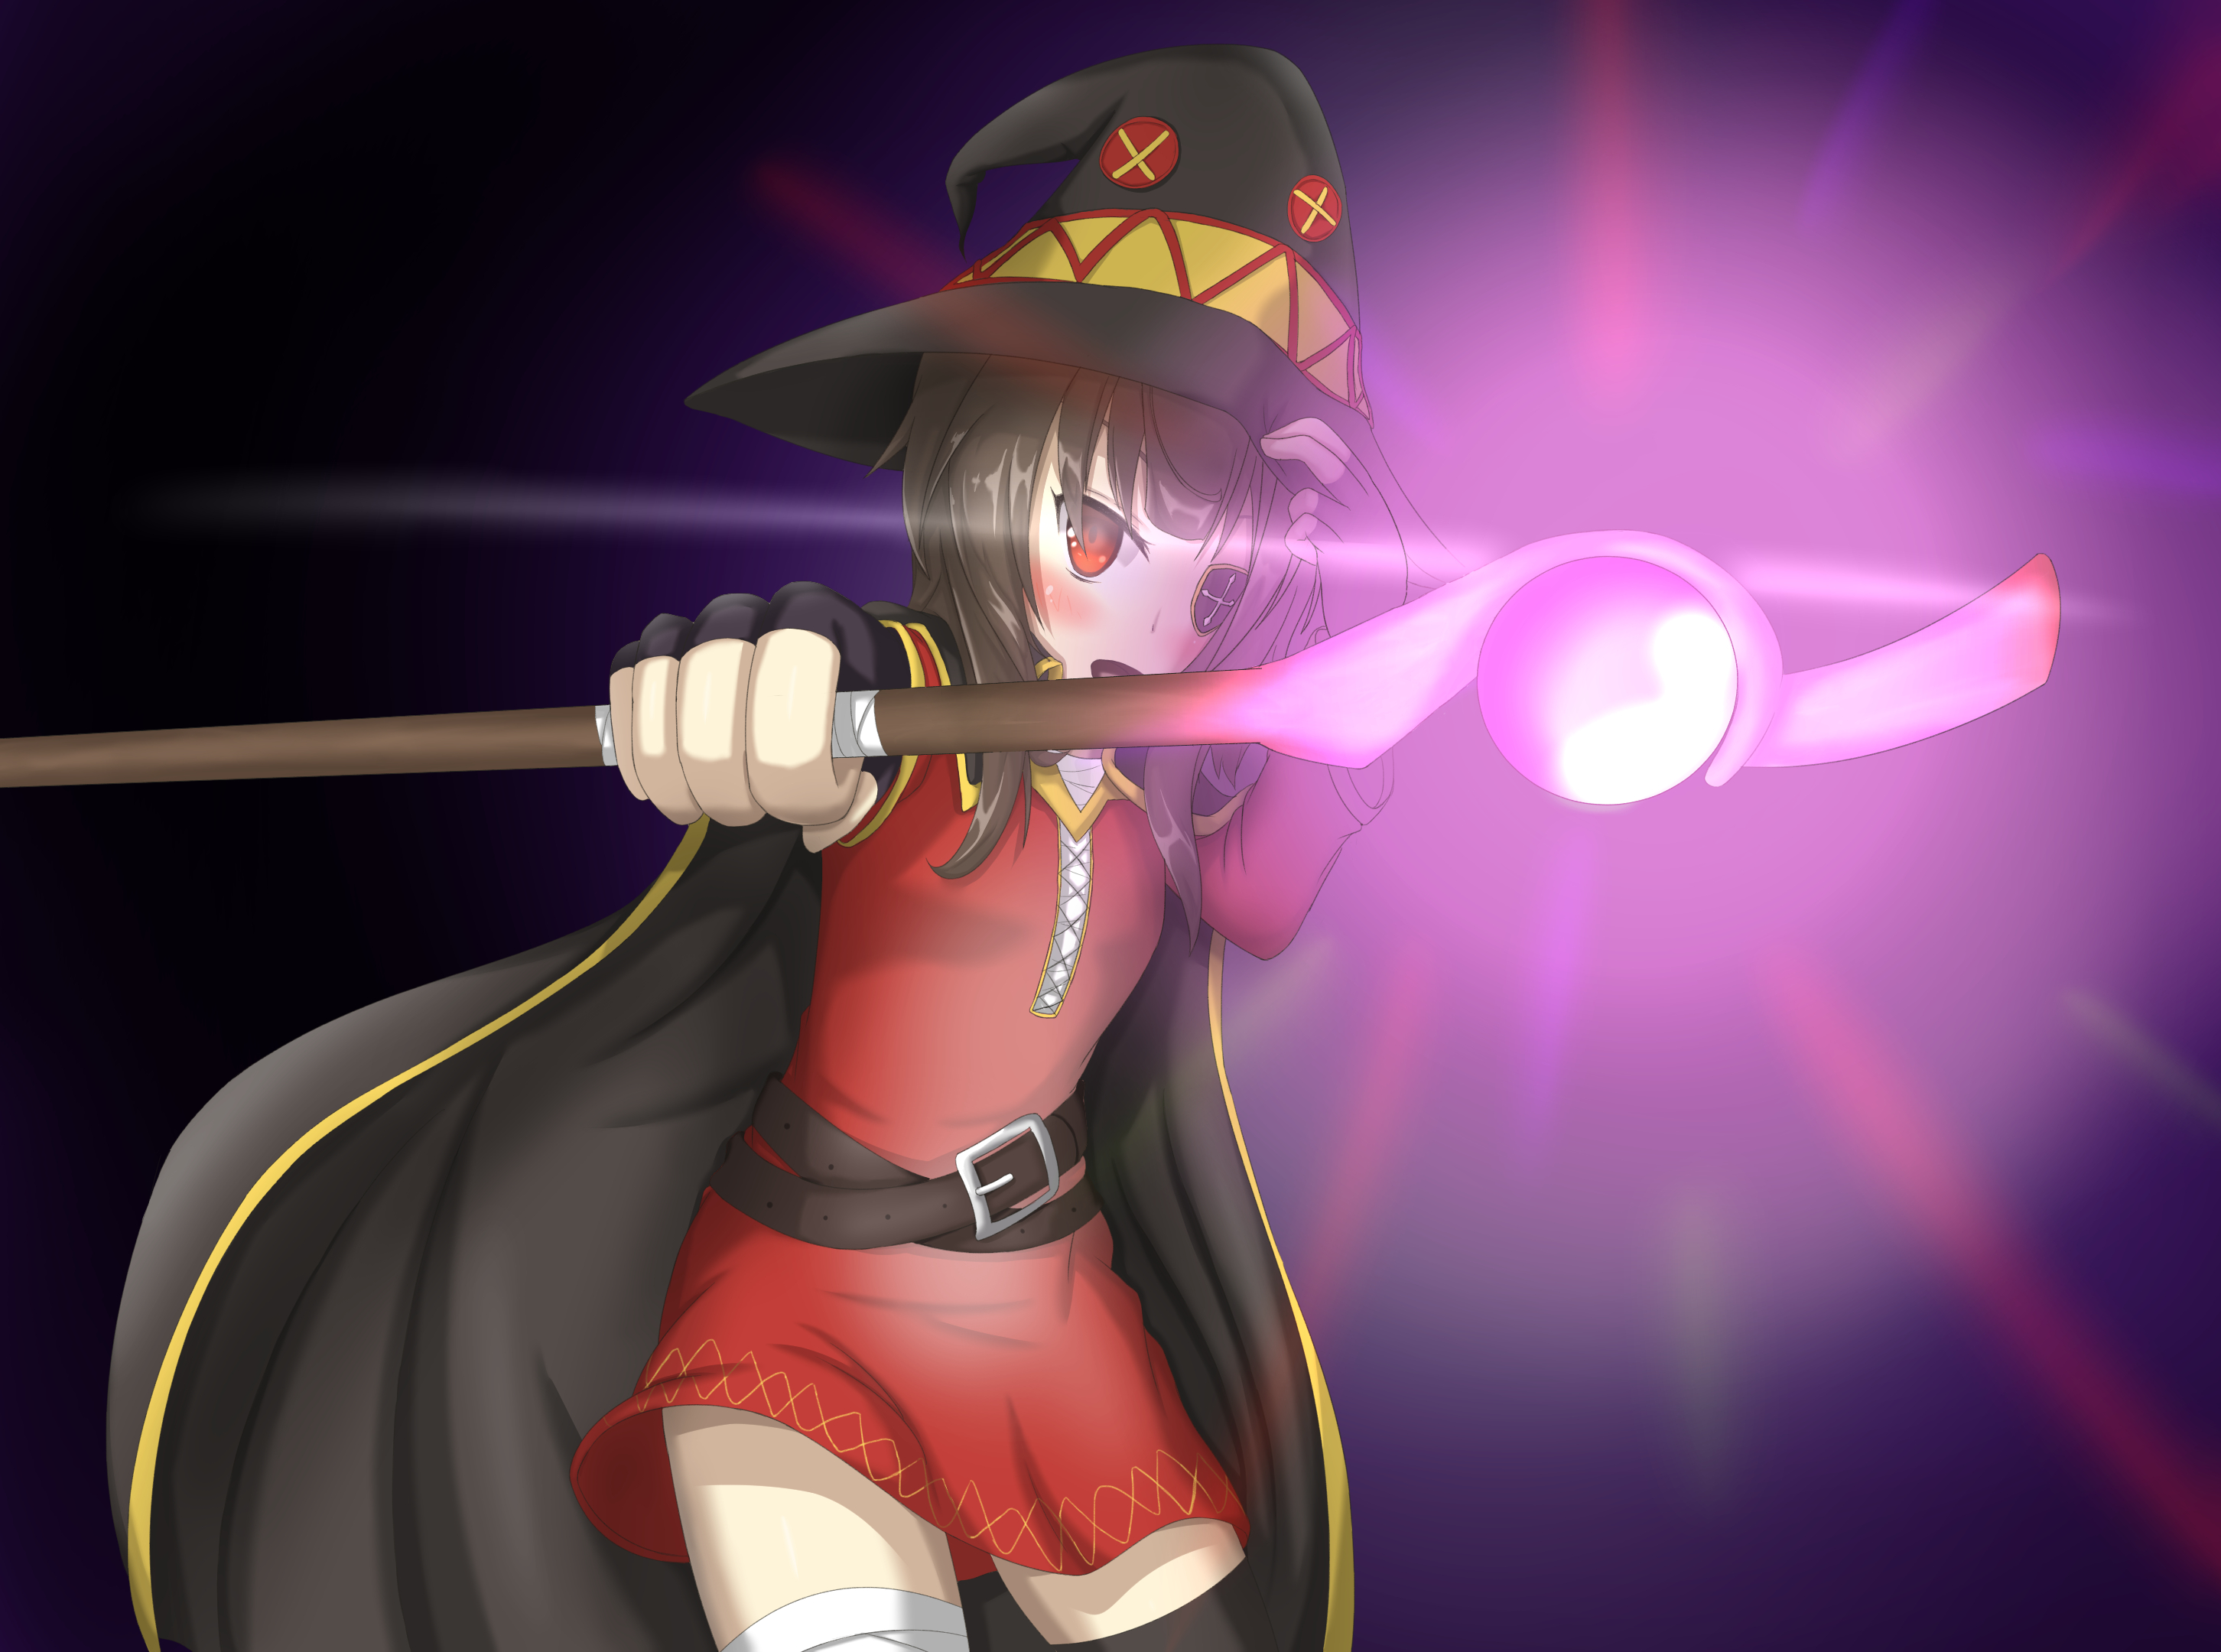 Megumin by Loots